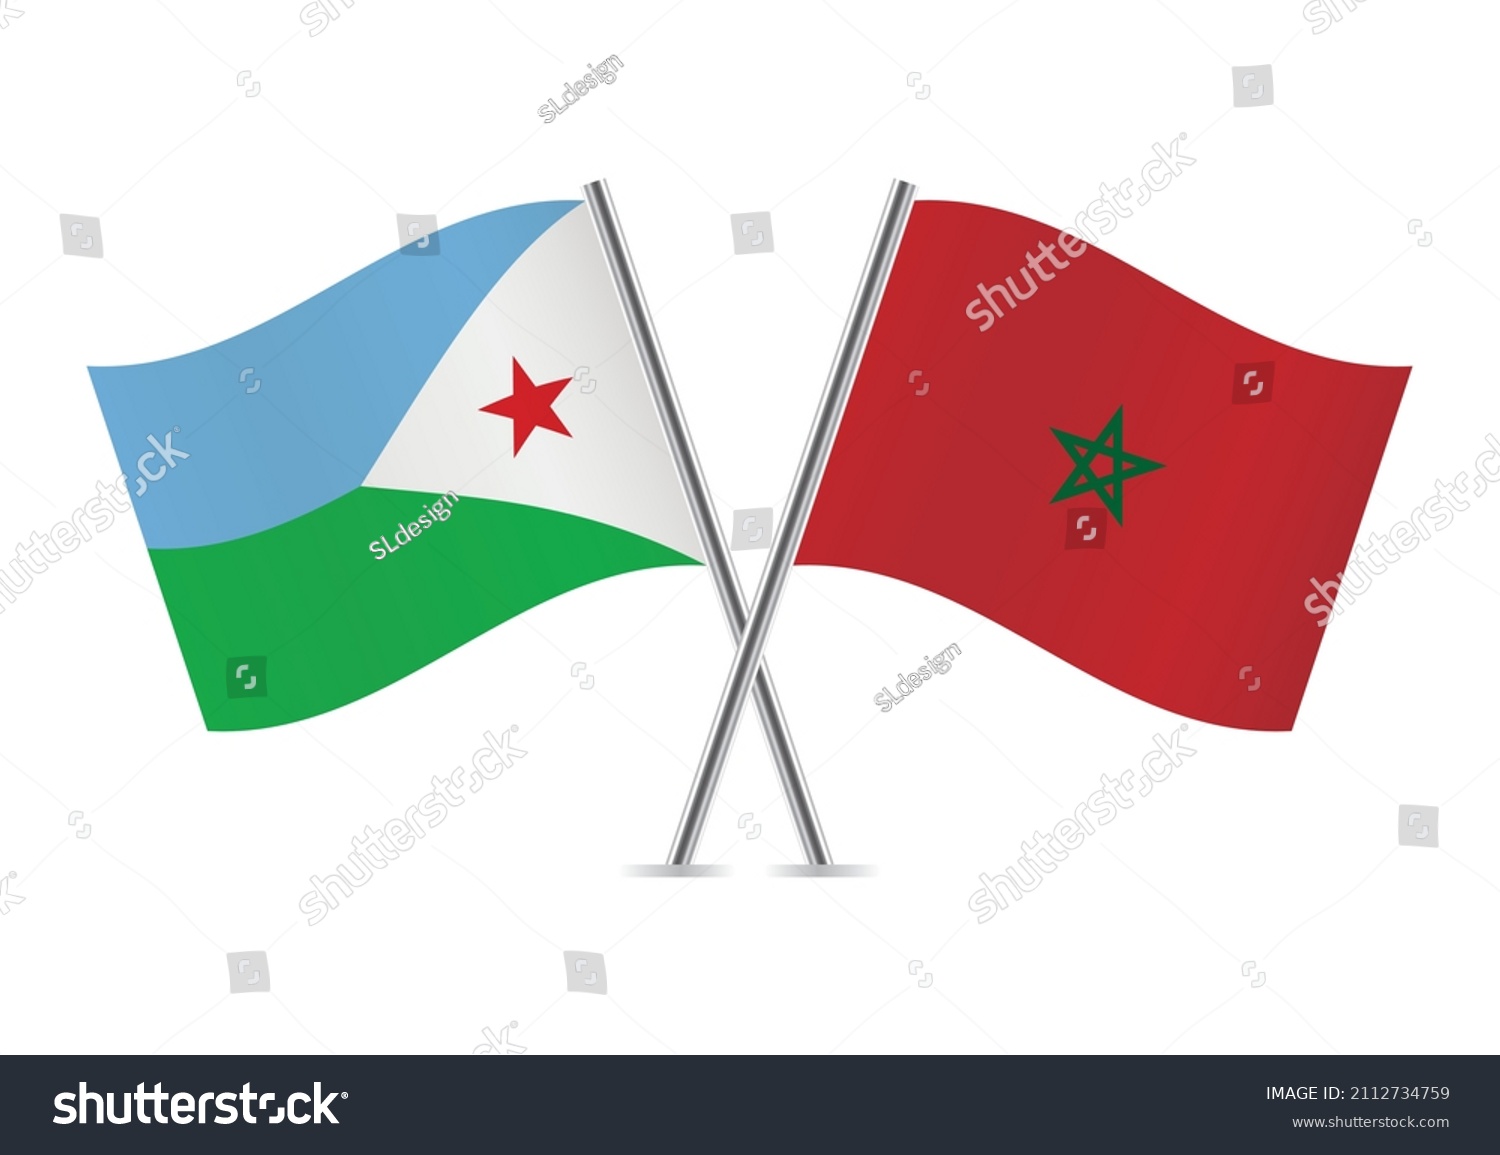 SVG of Djibouti and Morocco flags isolated on white background. The Republic of Djibouti and Moroccan flags. Vector illustration. svg